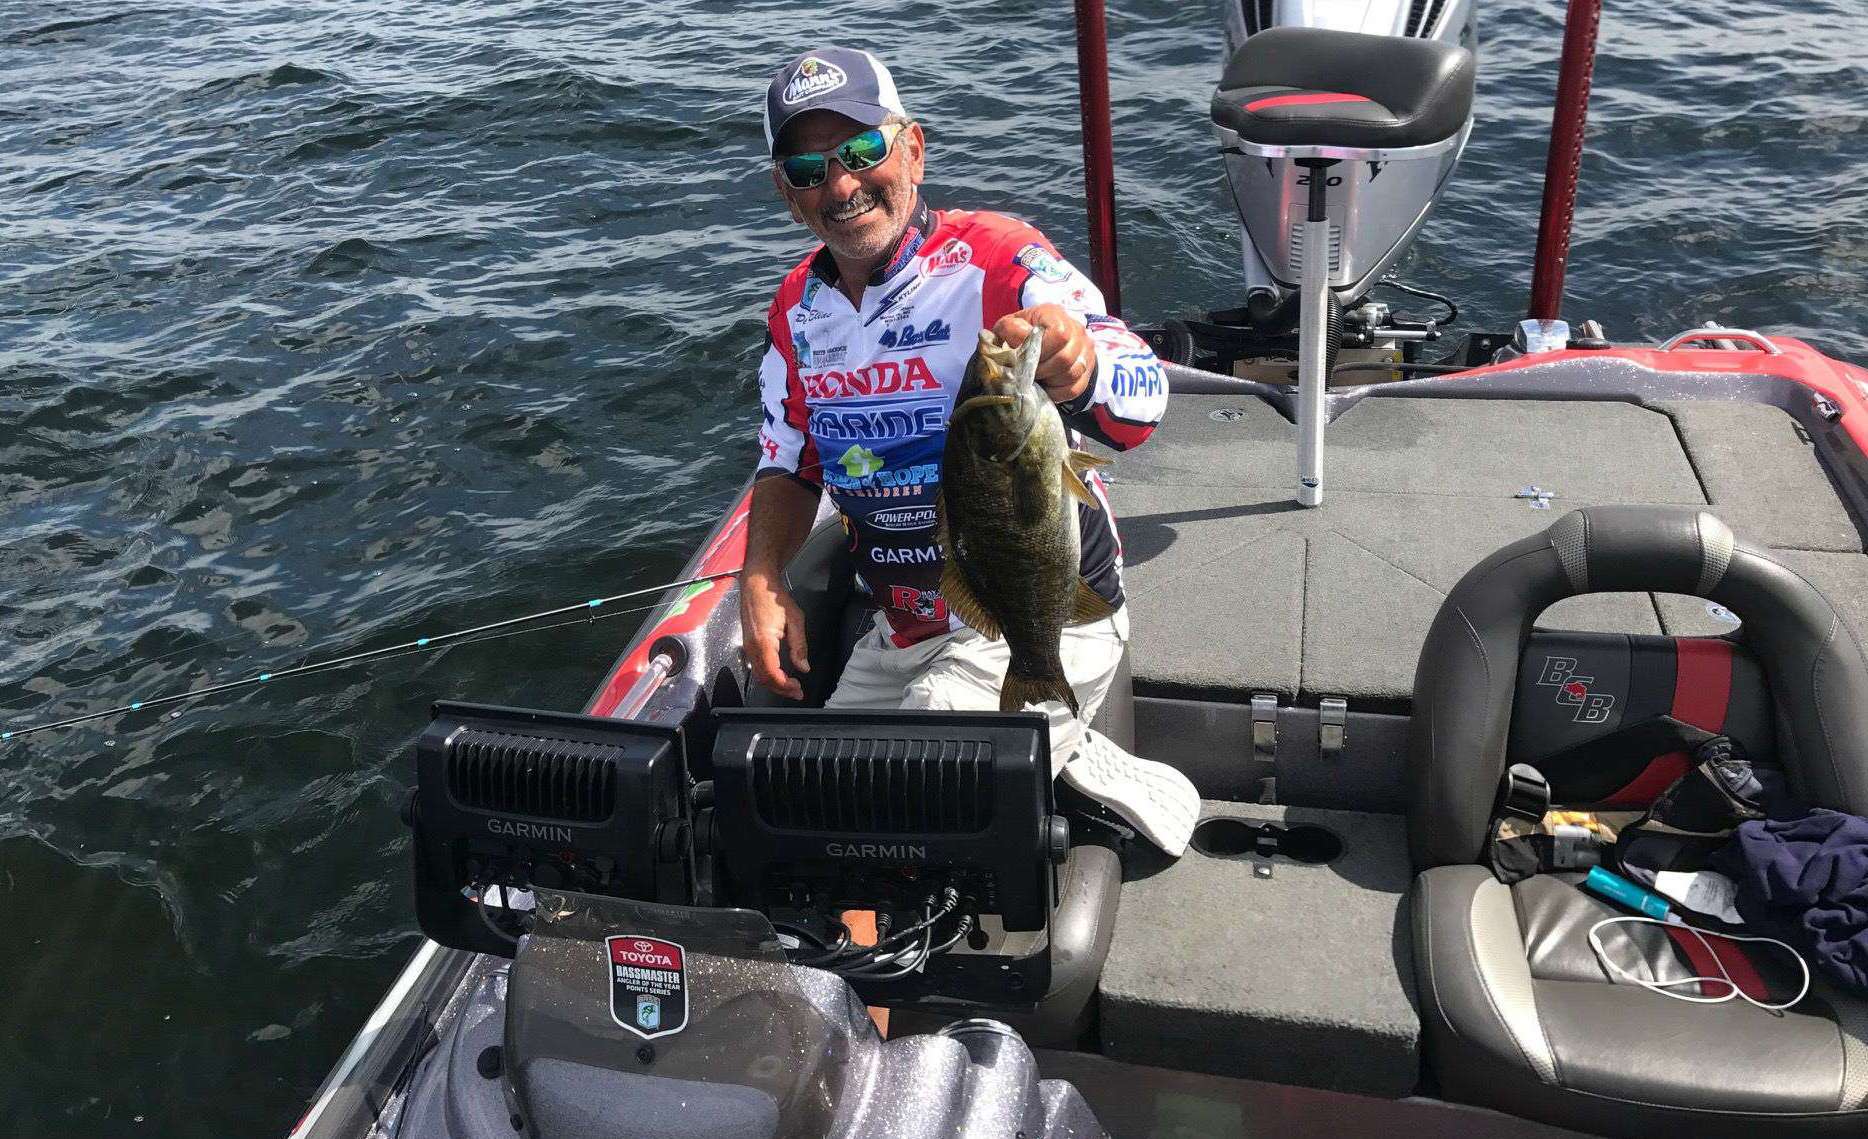 <h4>Paul Elias</h4><BR>
Elias joined the tour in 1979, won the 1982 Bassmaster Classic and then qualified for 16 Classics. Elias has $1.1 million and currently competes in the Bassmaster Elite Series. To win the Classic he kneeled on the casting deck, thrusting his six-foot fishing rod below the surface to gain more depth for his crankbait. Bassmaster magazine called the technique âkneeling and reelingâ and deep cranking was born. Elias then worked with Mannâs Bait Co. to develop the first true deep diving crankbait, namely the 20+ model capable of running 20 feet. 
